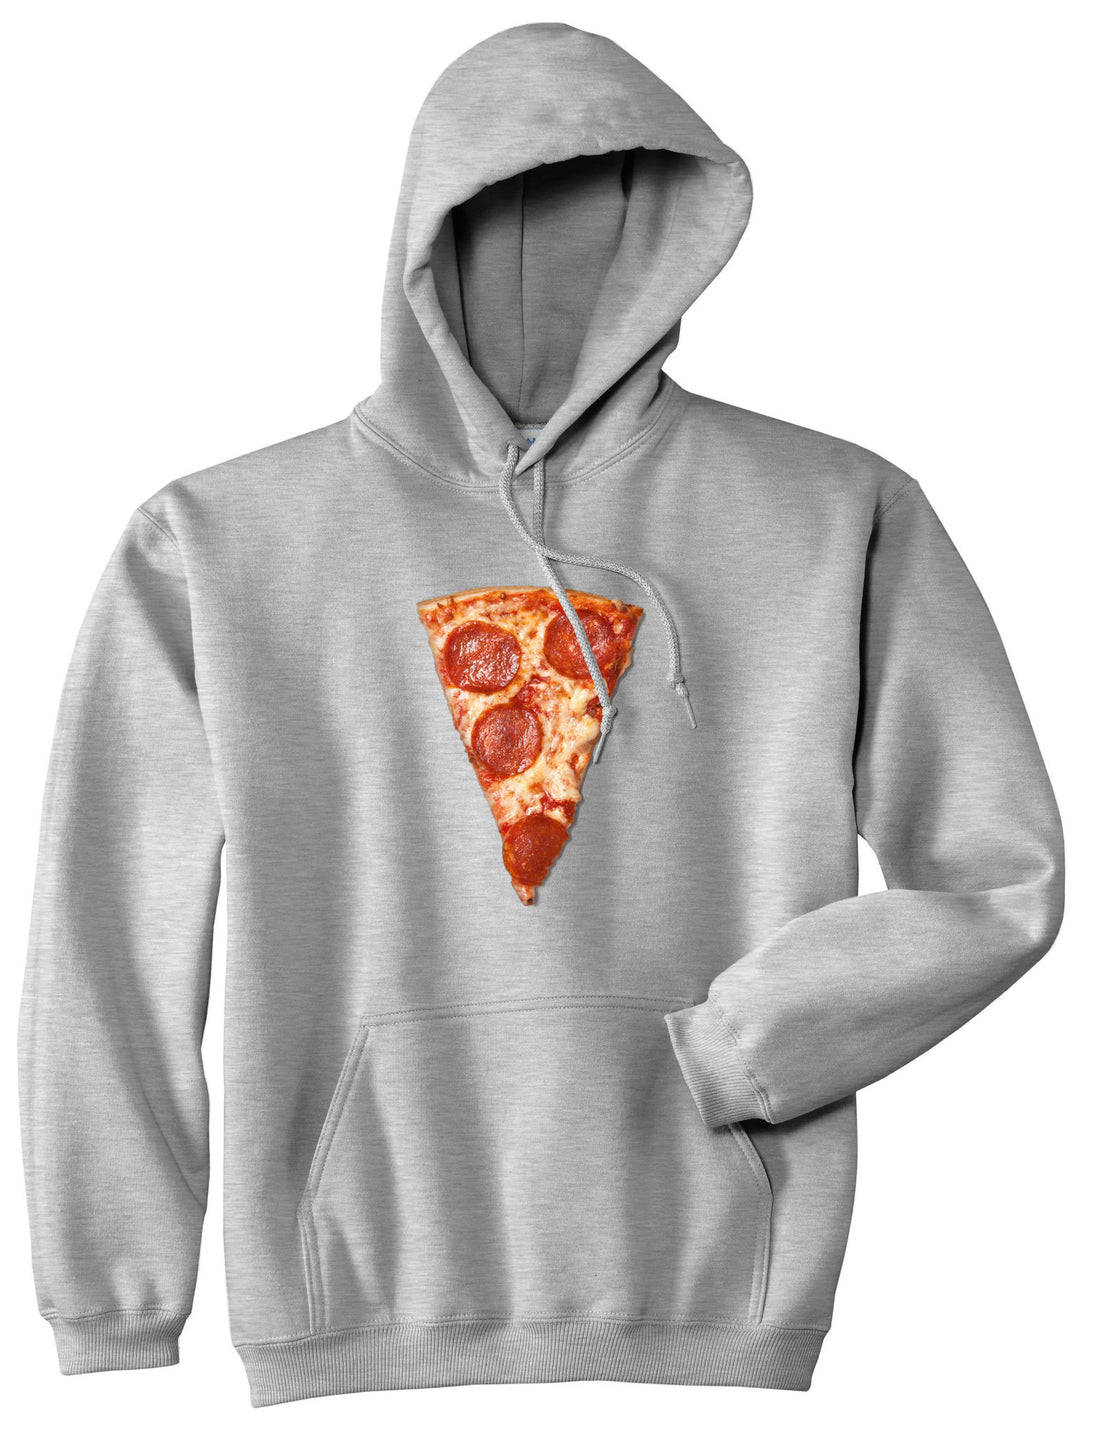 Real Pizza with Pepperoni Emoji Meme Pullover Hoodie